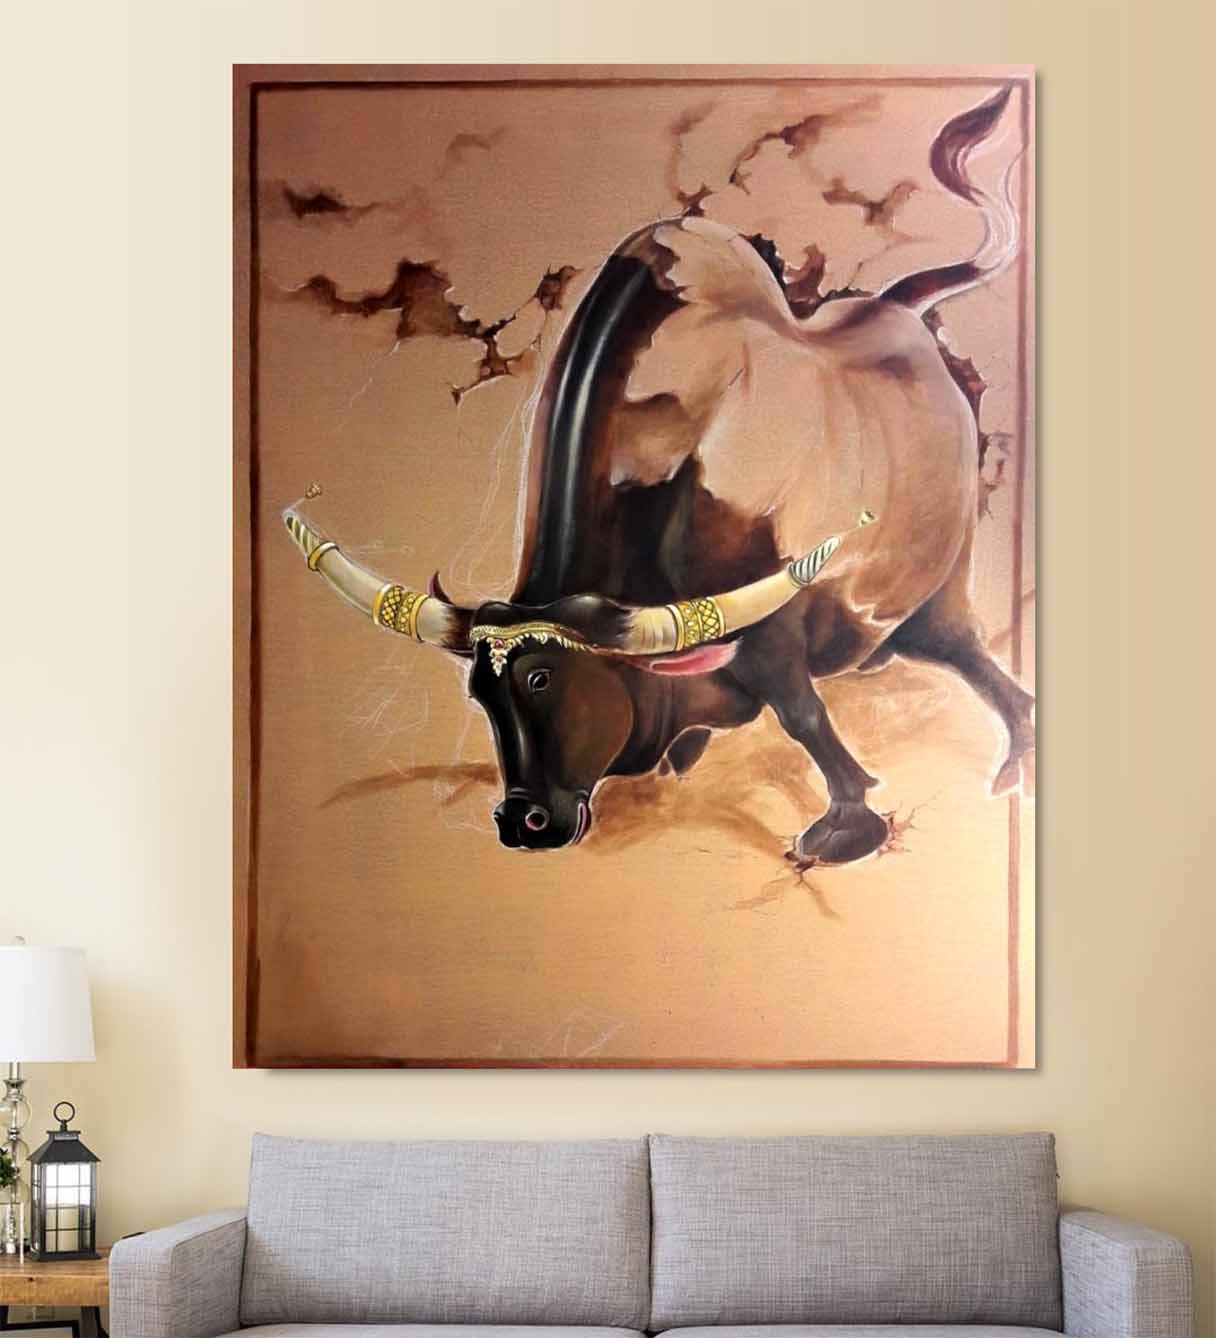 Bull in its Glory Digital Art Painting by Swapan Das Hanging on the Wall above the Sofa